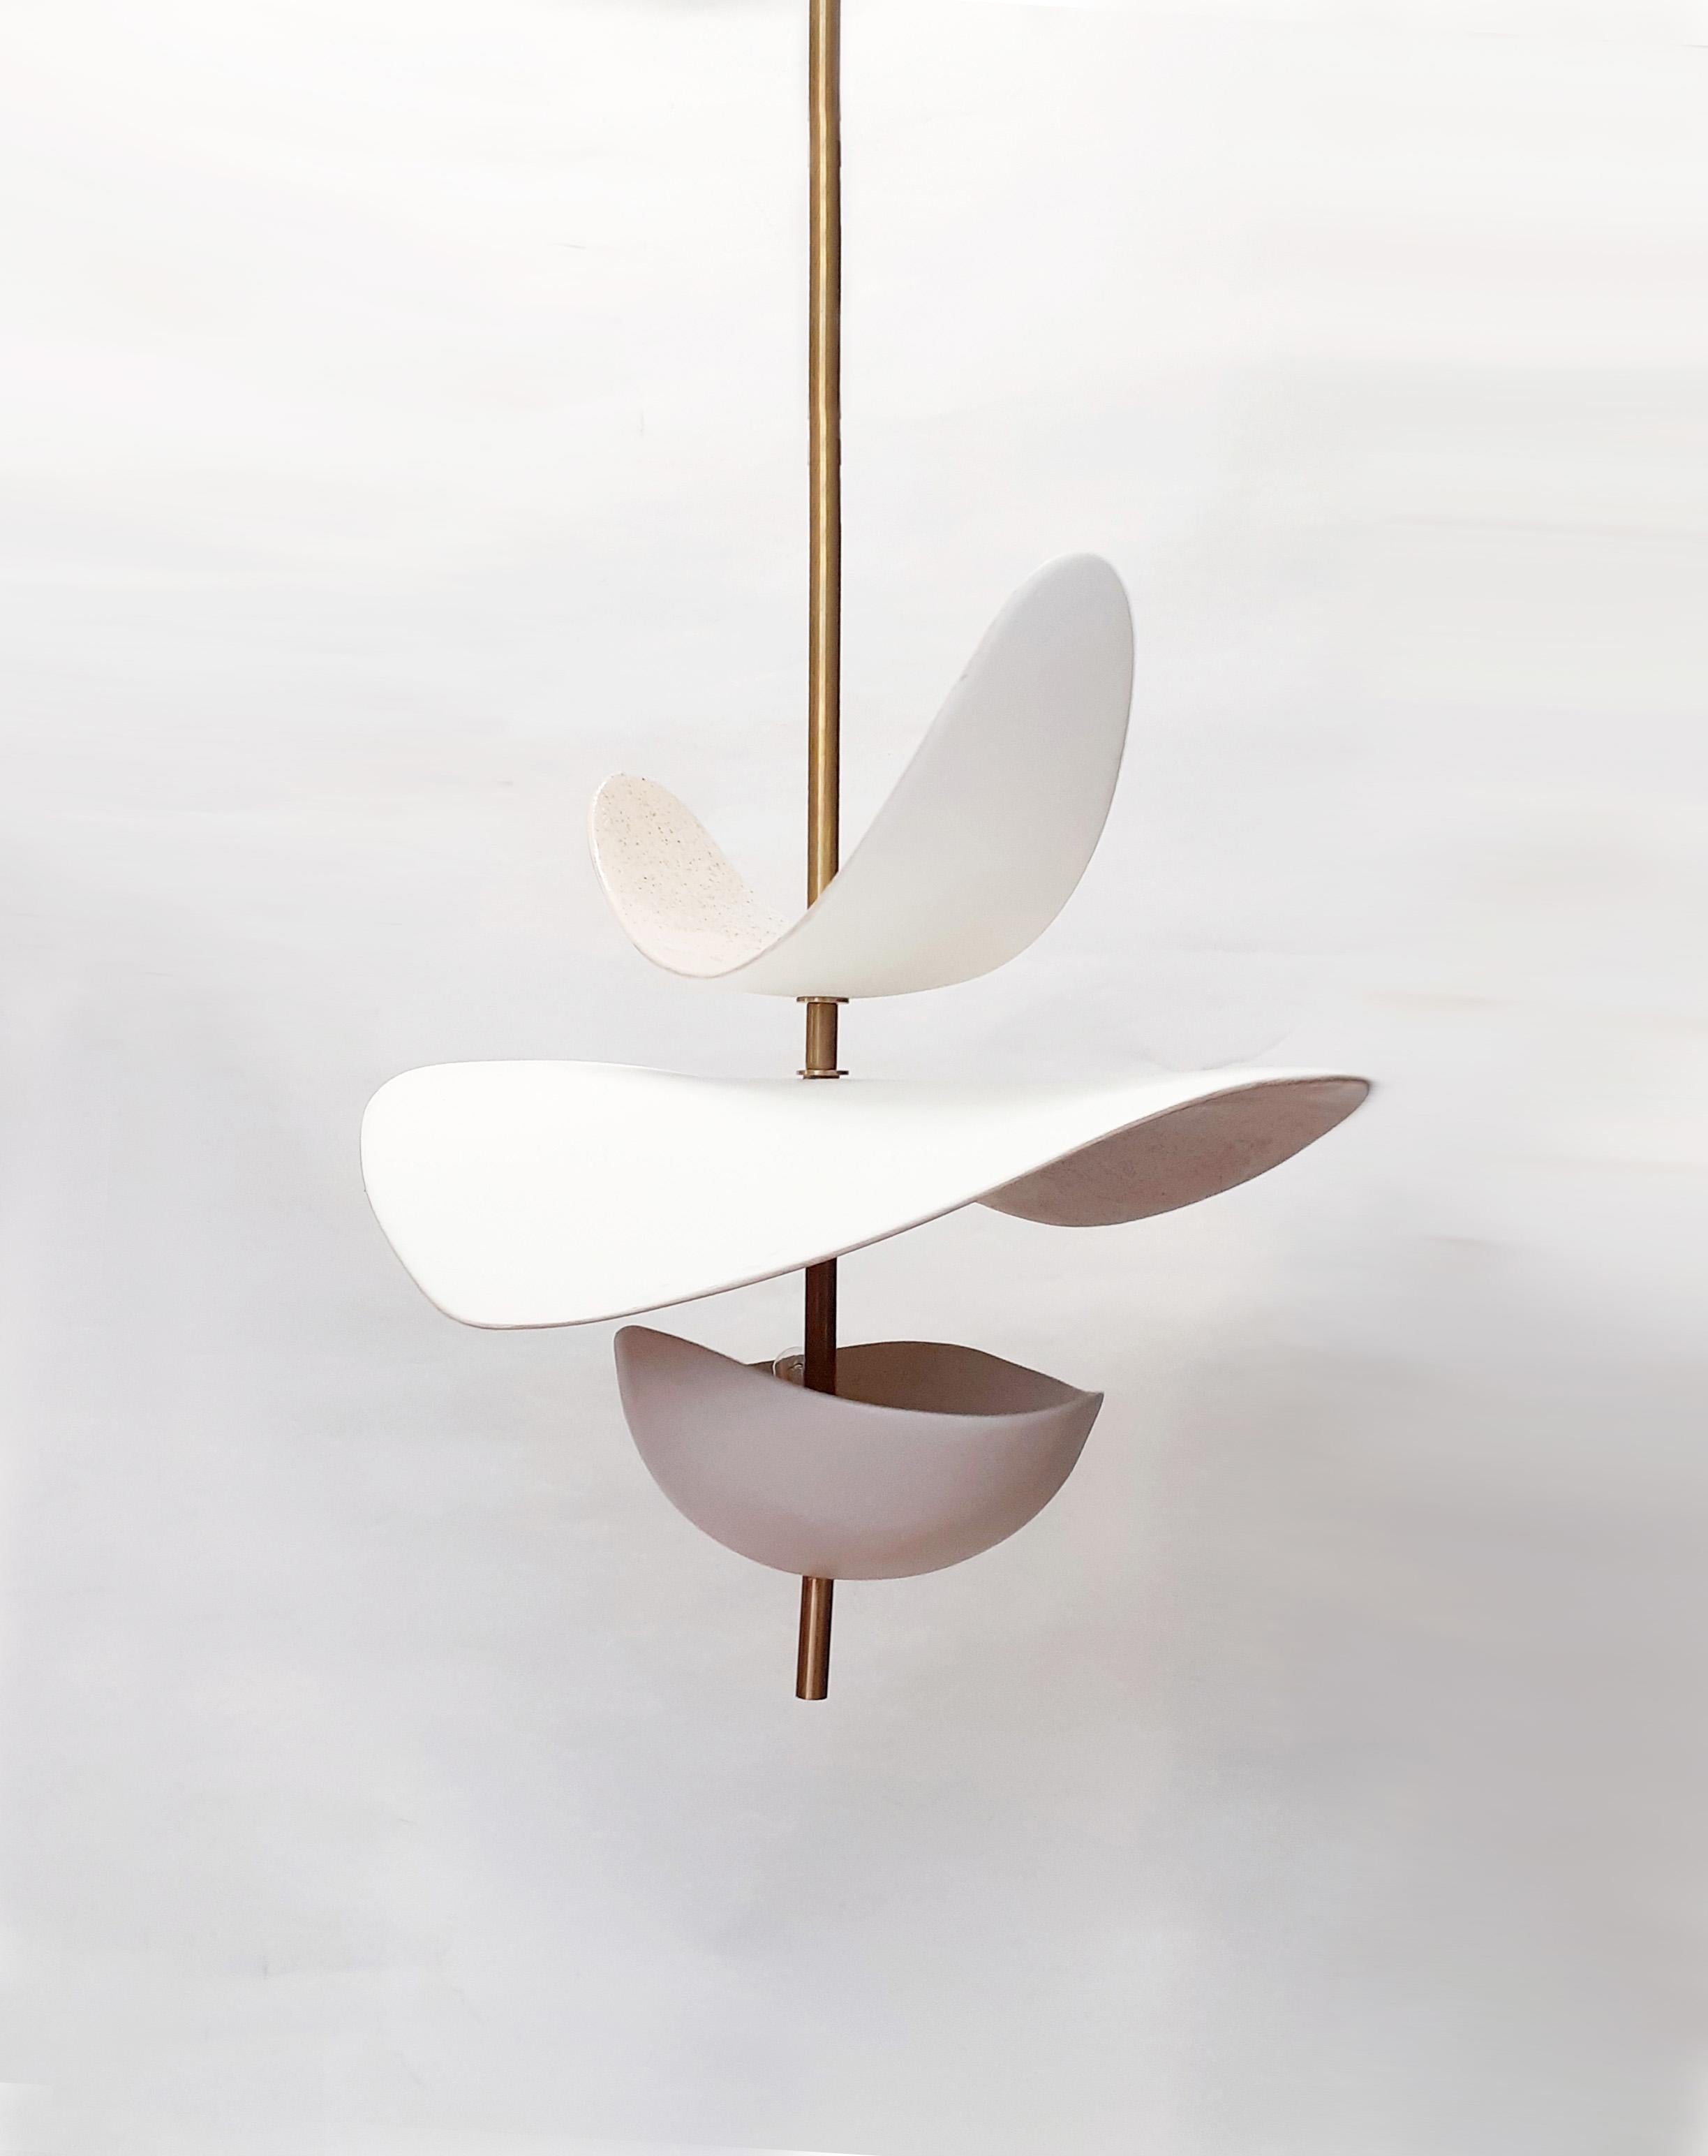 Sculptural ceramic suspension.
Poetic and organic design handmade by Elsa Foulon Studio in her Parisian workshop.
Enameled ceramic, brass structure.
The size of the ceramic part can be customized ( max lenght : 29.5 Inch - additional cost )
Two